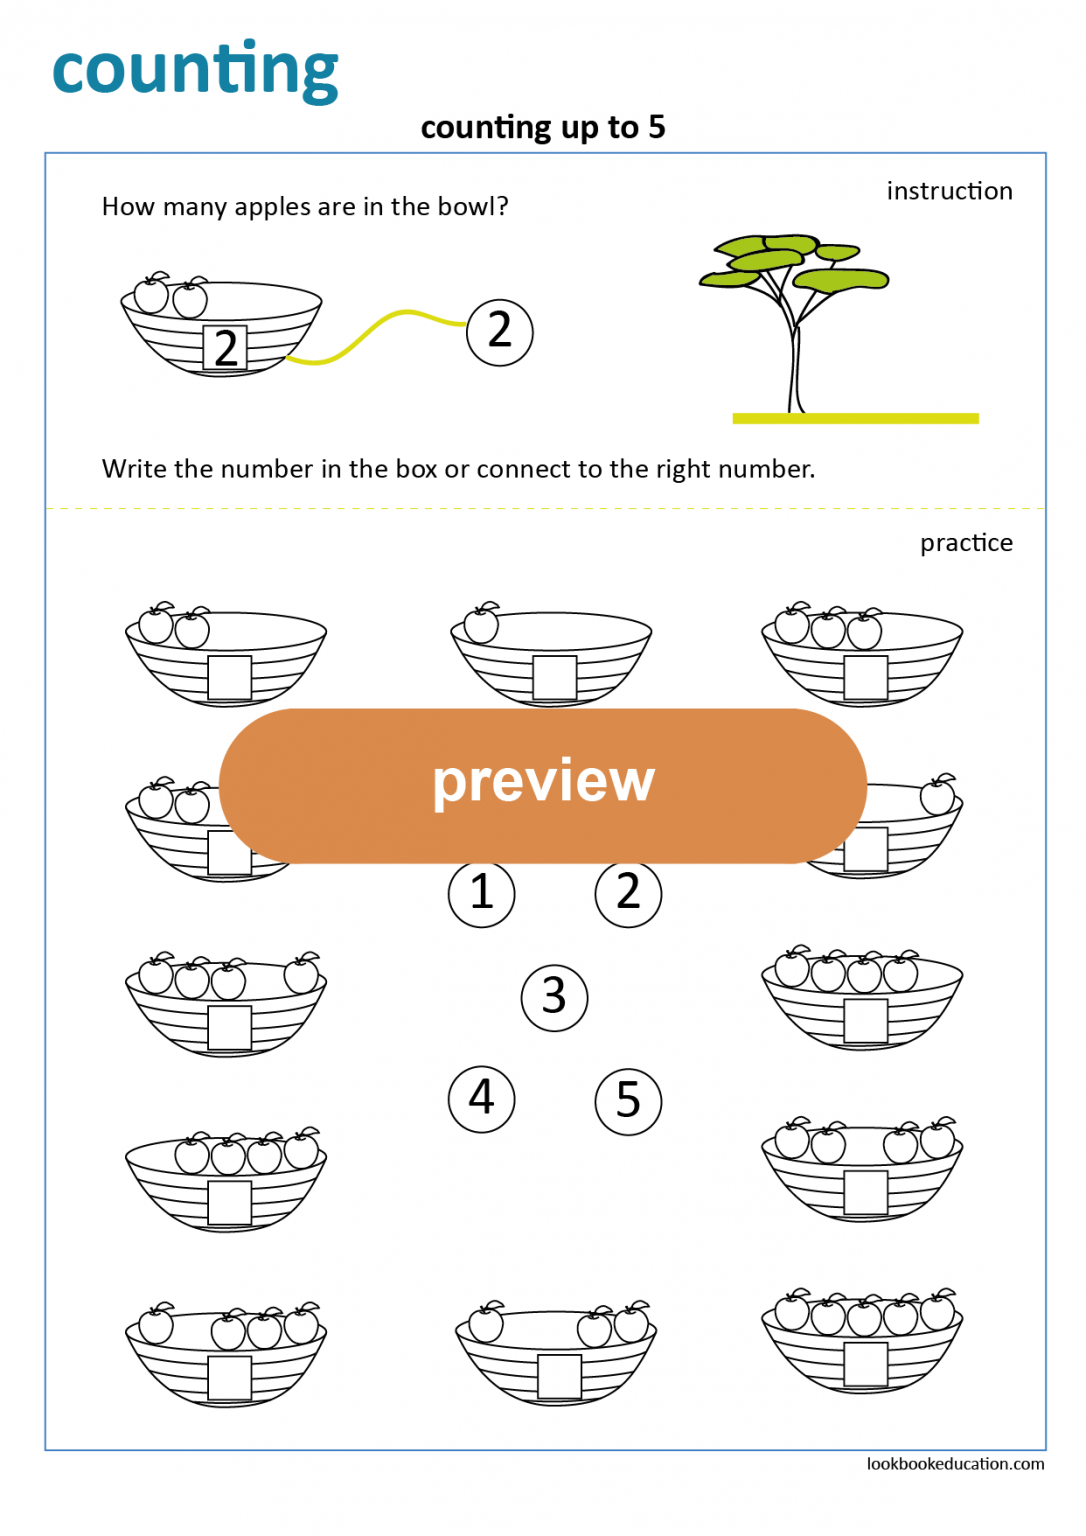 Worksheet Counting to 5 LookbookEducation com